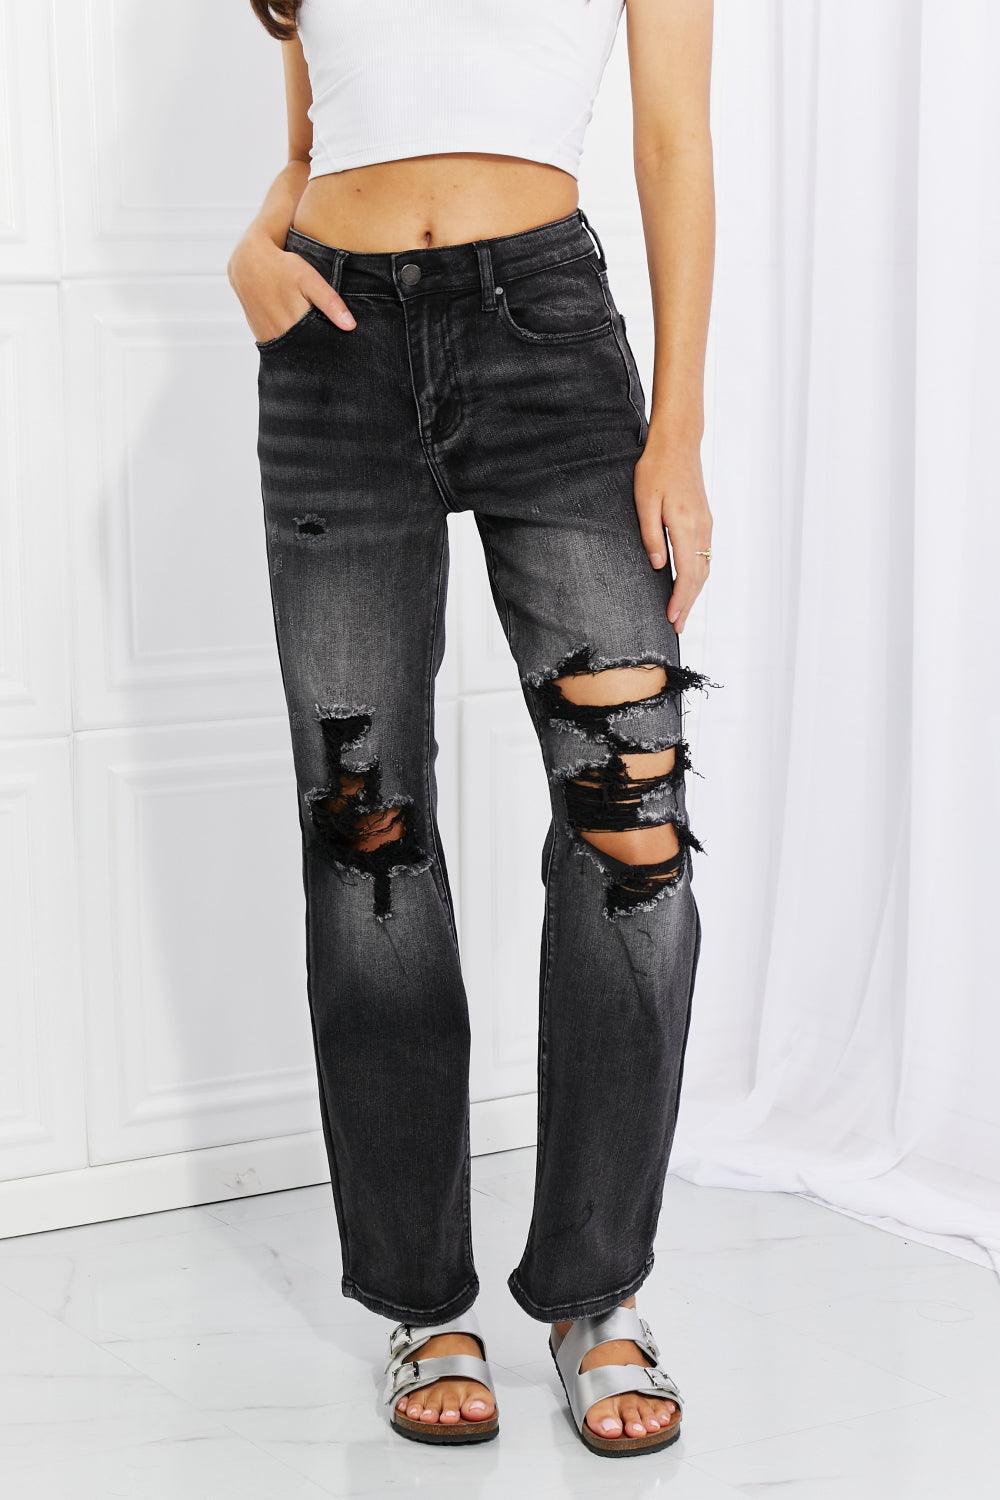 RISEN Full Size Lois Distressed Loose Fit Jeans - The Fiery Jasmine